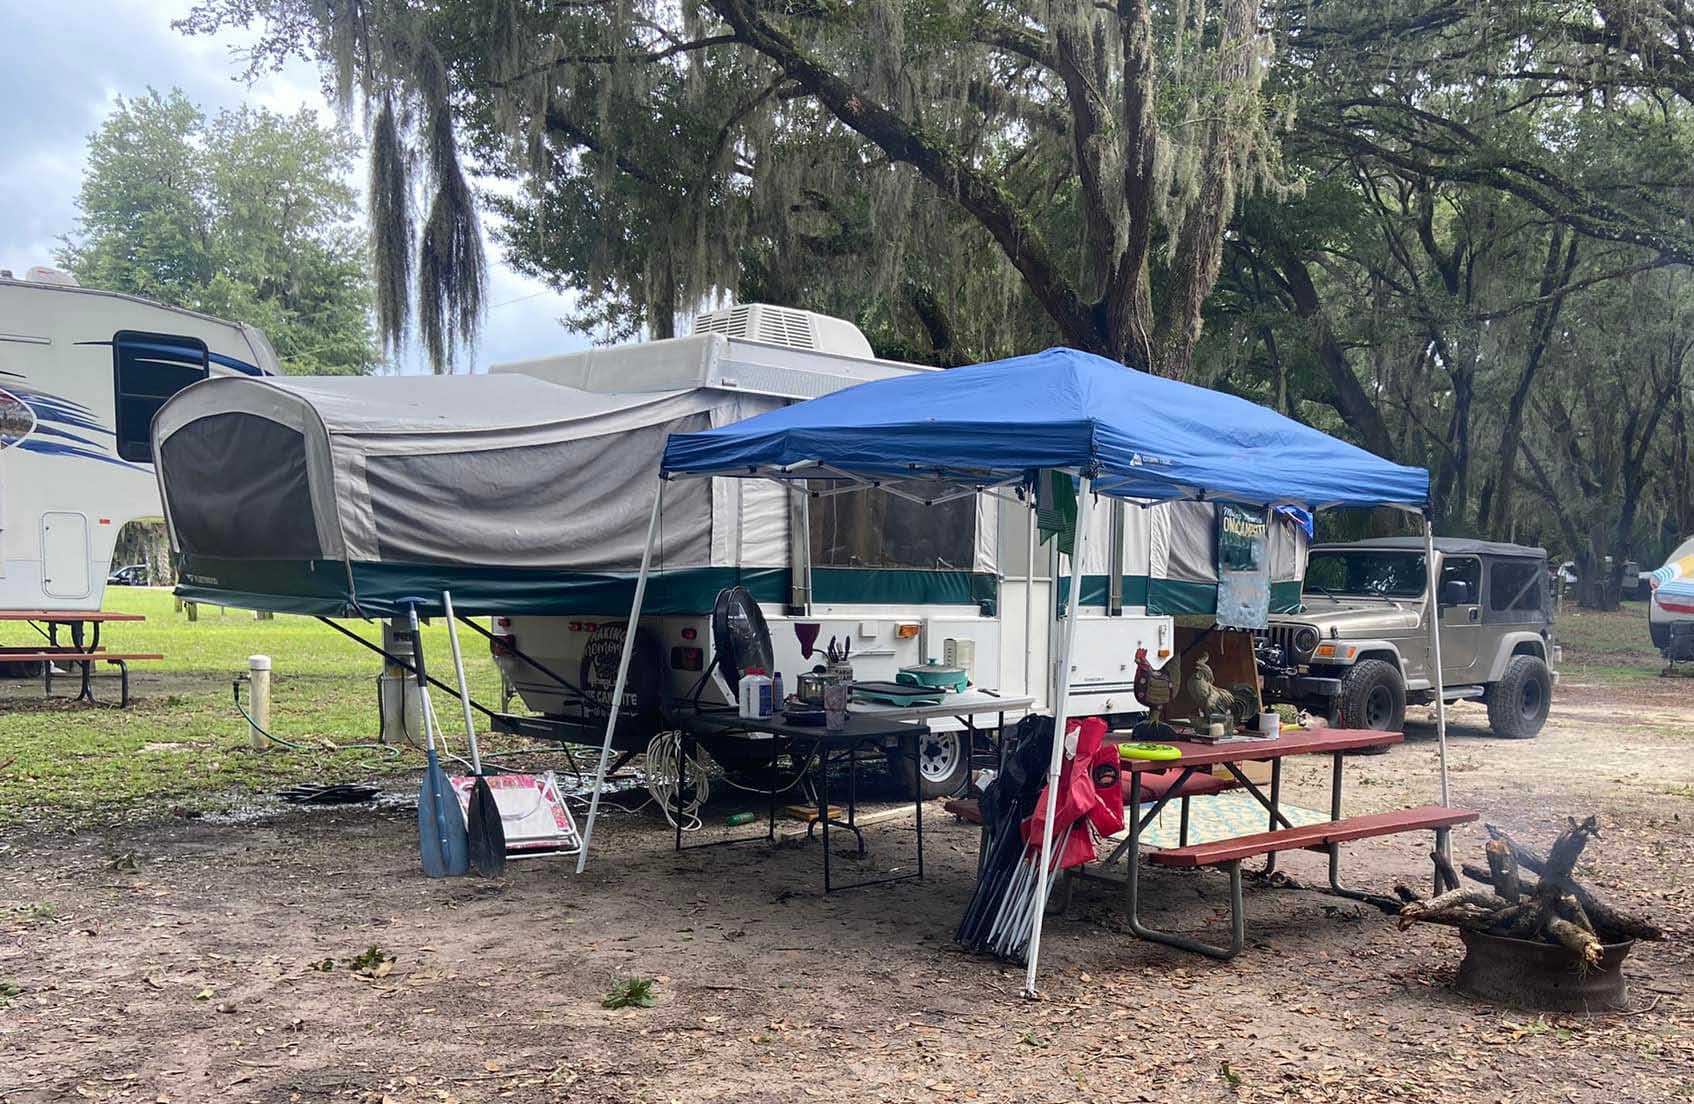 Camping in Ocala National Forest.